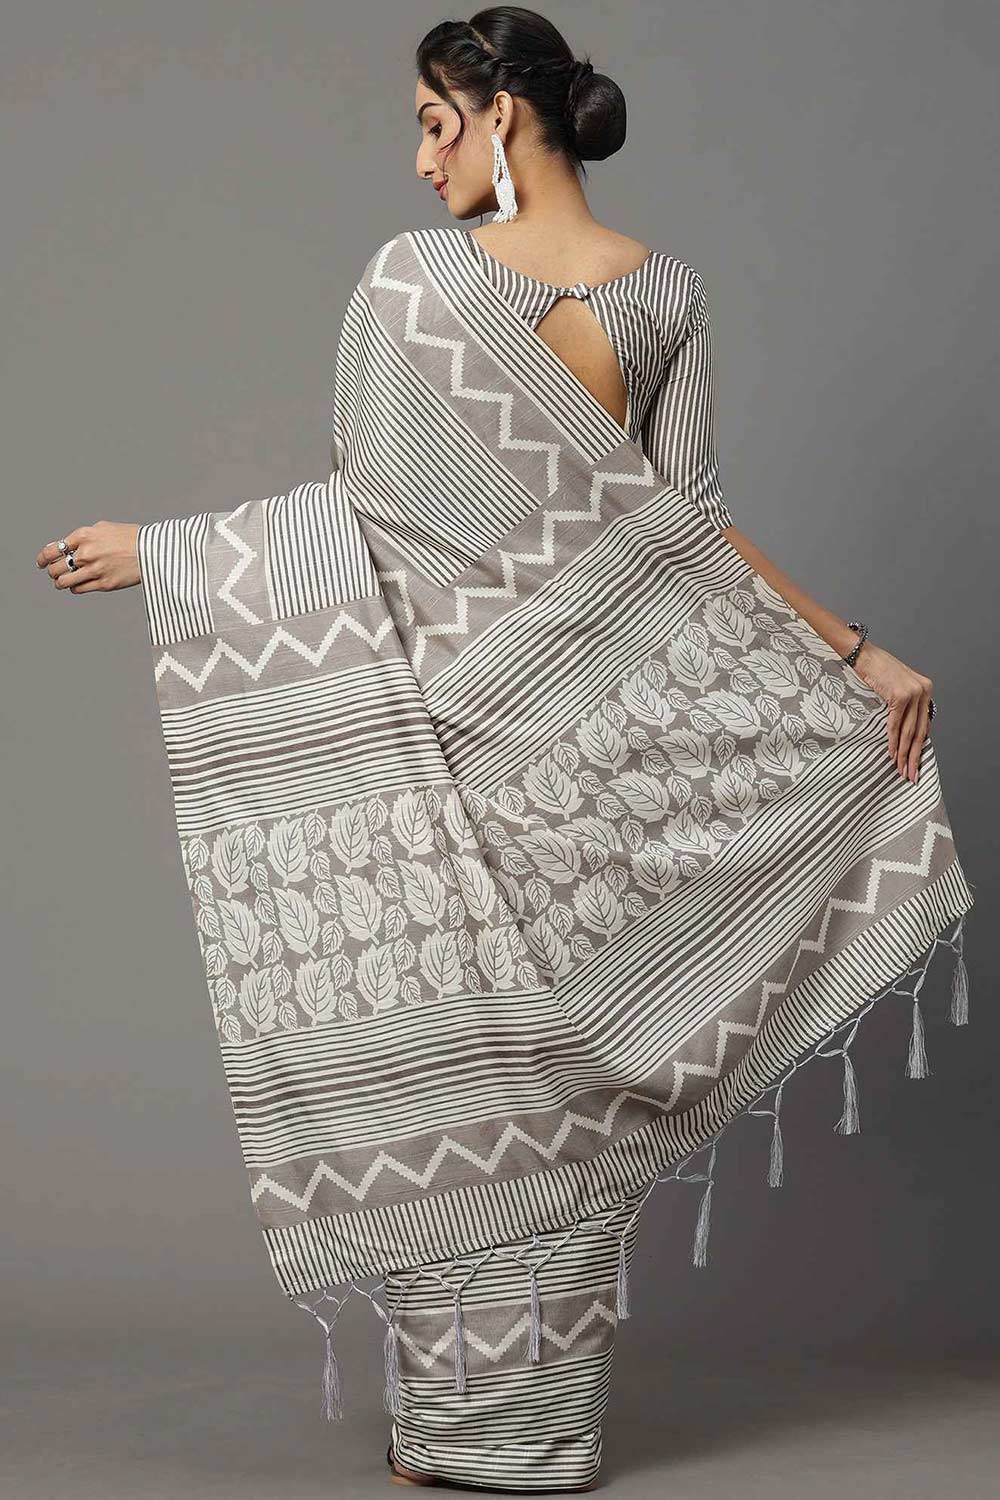 Shop Shelly Bhagalpuri Silk Grey Printed Designer One Minute Saree at best offer at our  Store - One Minute Saree